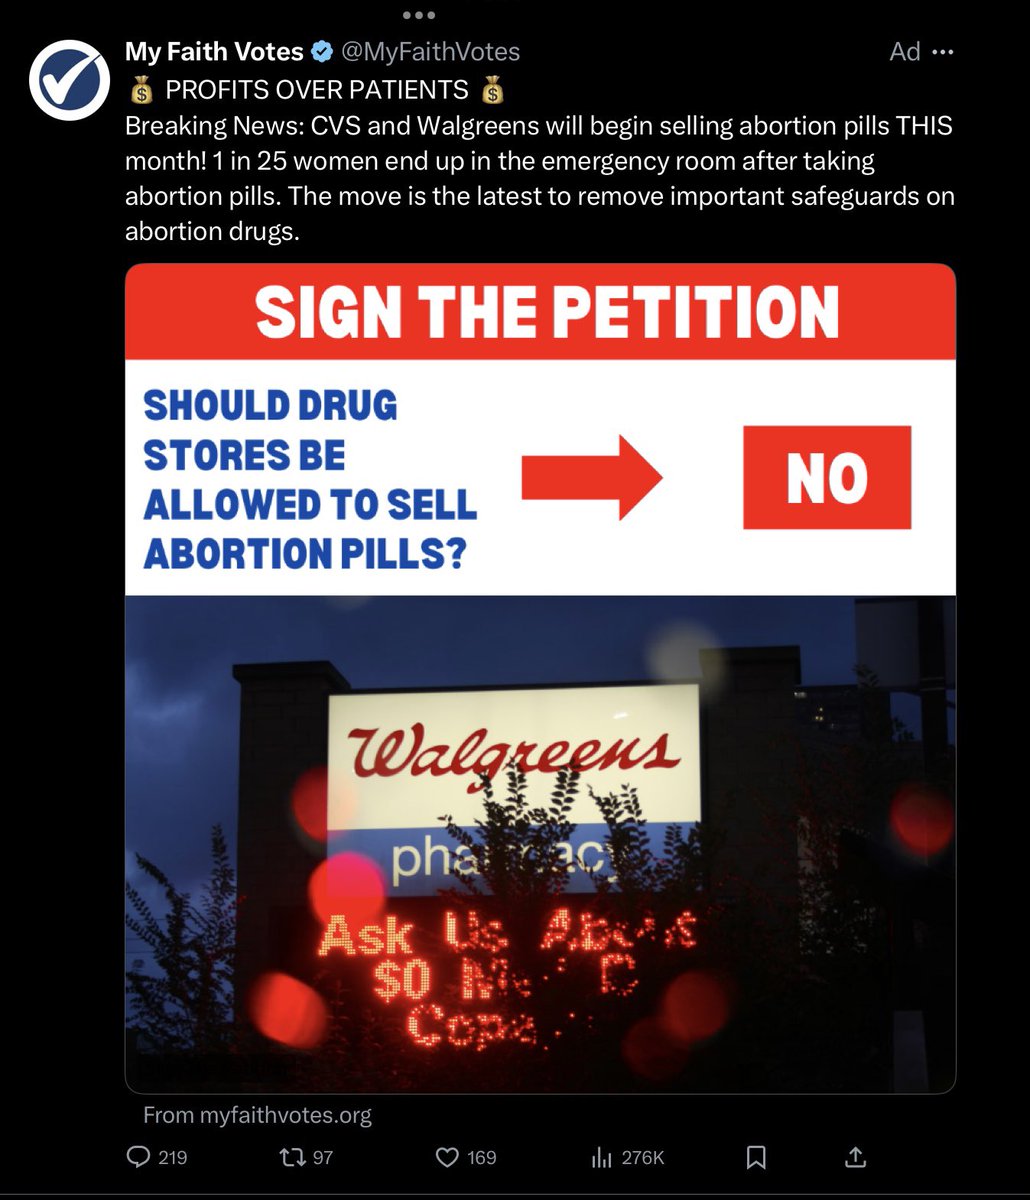 Get a load of this super annoying 'petition' re. what I think are nothing more controversial than OTC morning-after pills. They don't give you a choice to say 'Hell Yes.'